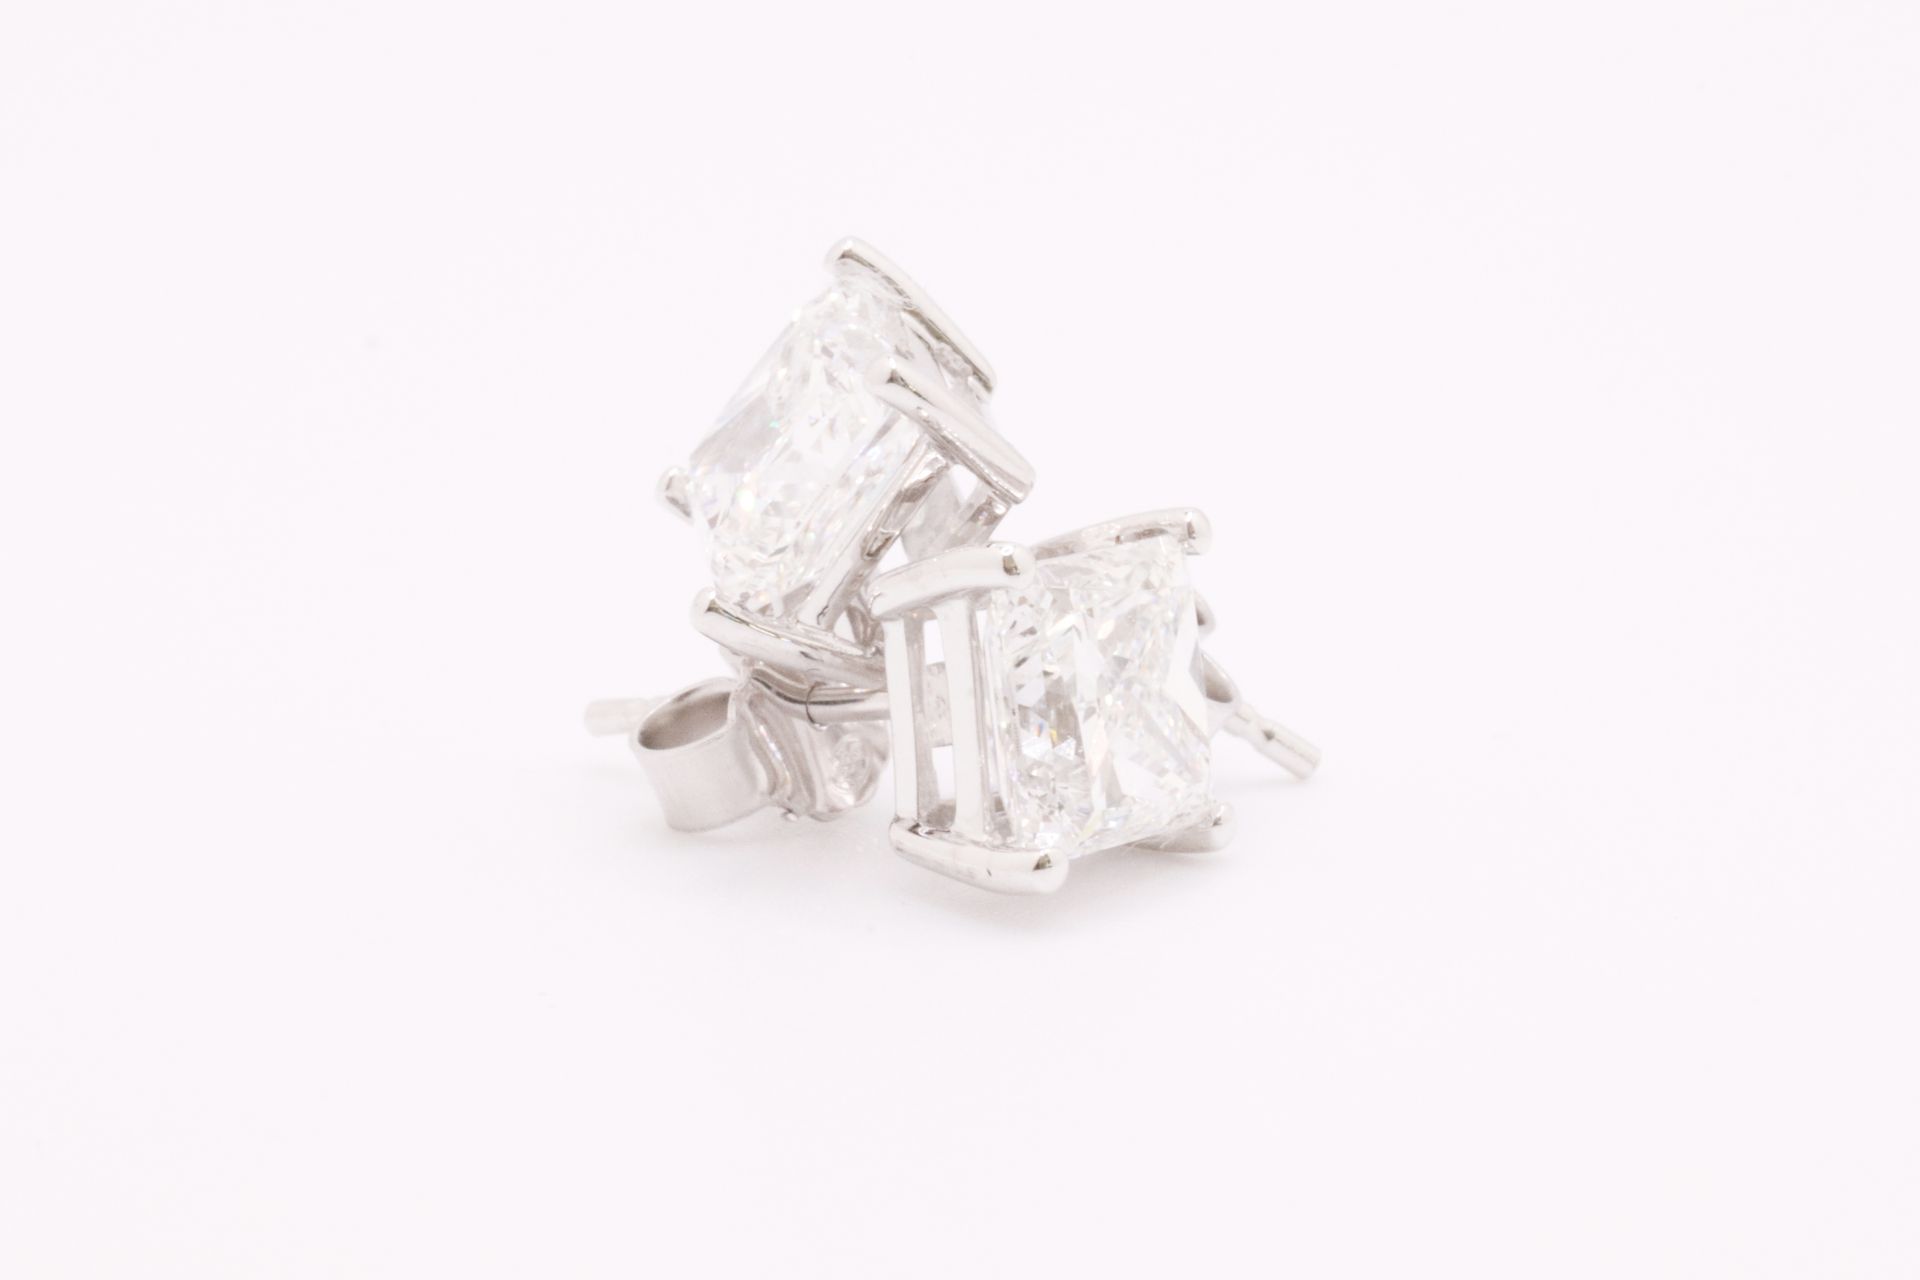 Princess Cut 5.00 Carat Diamond Earrings Set in 18kt White Gold - F Colour SI Clarity - Image 4 of 5